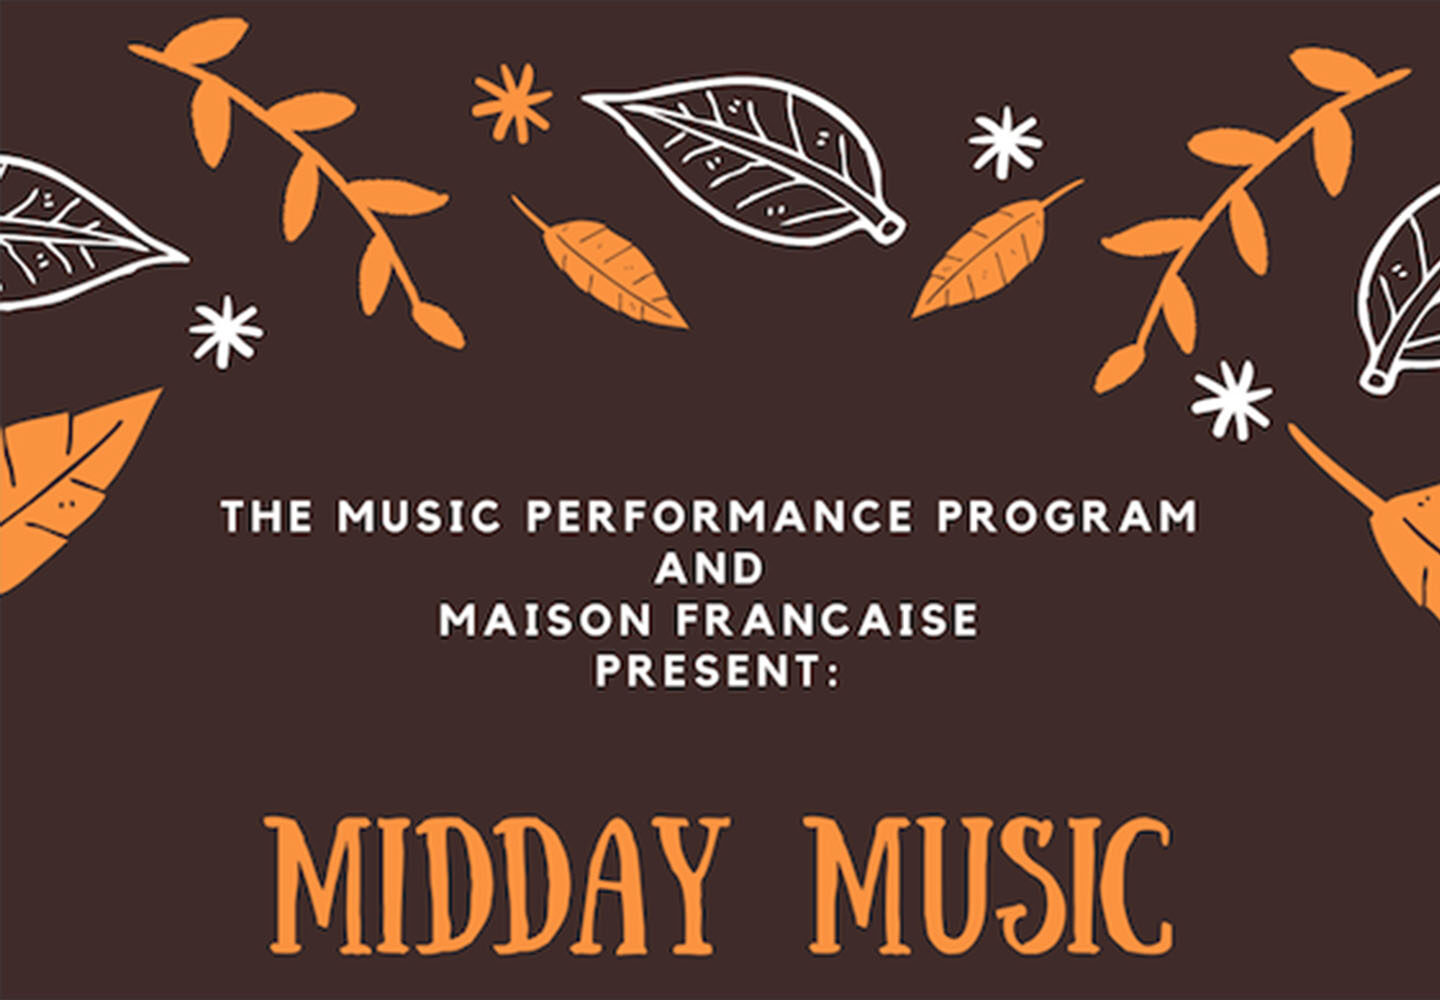 Midday Music at Maison Francaise